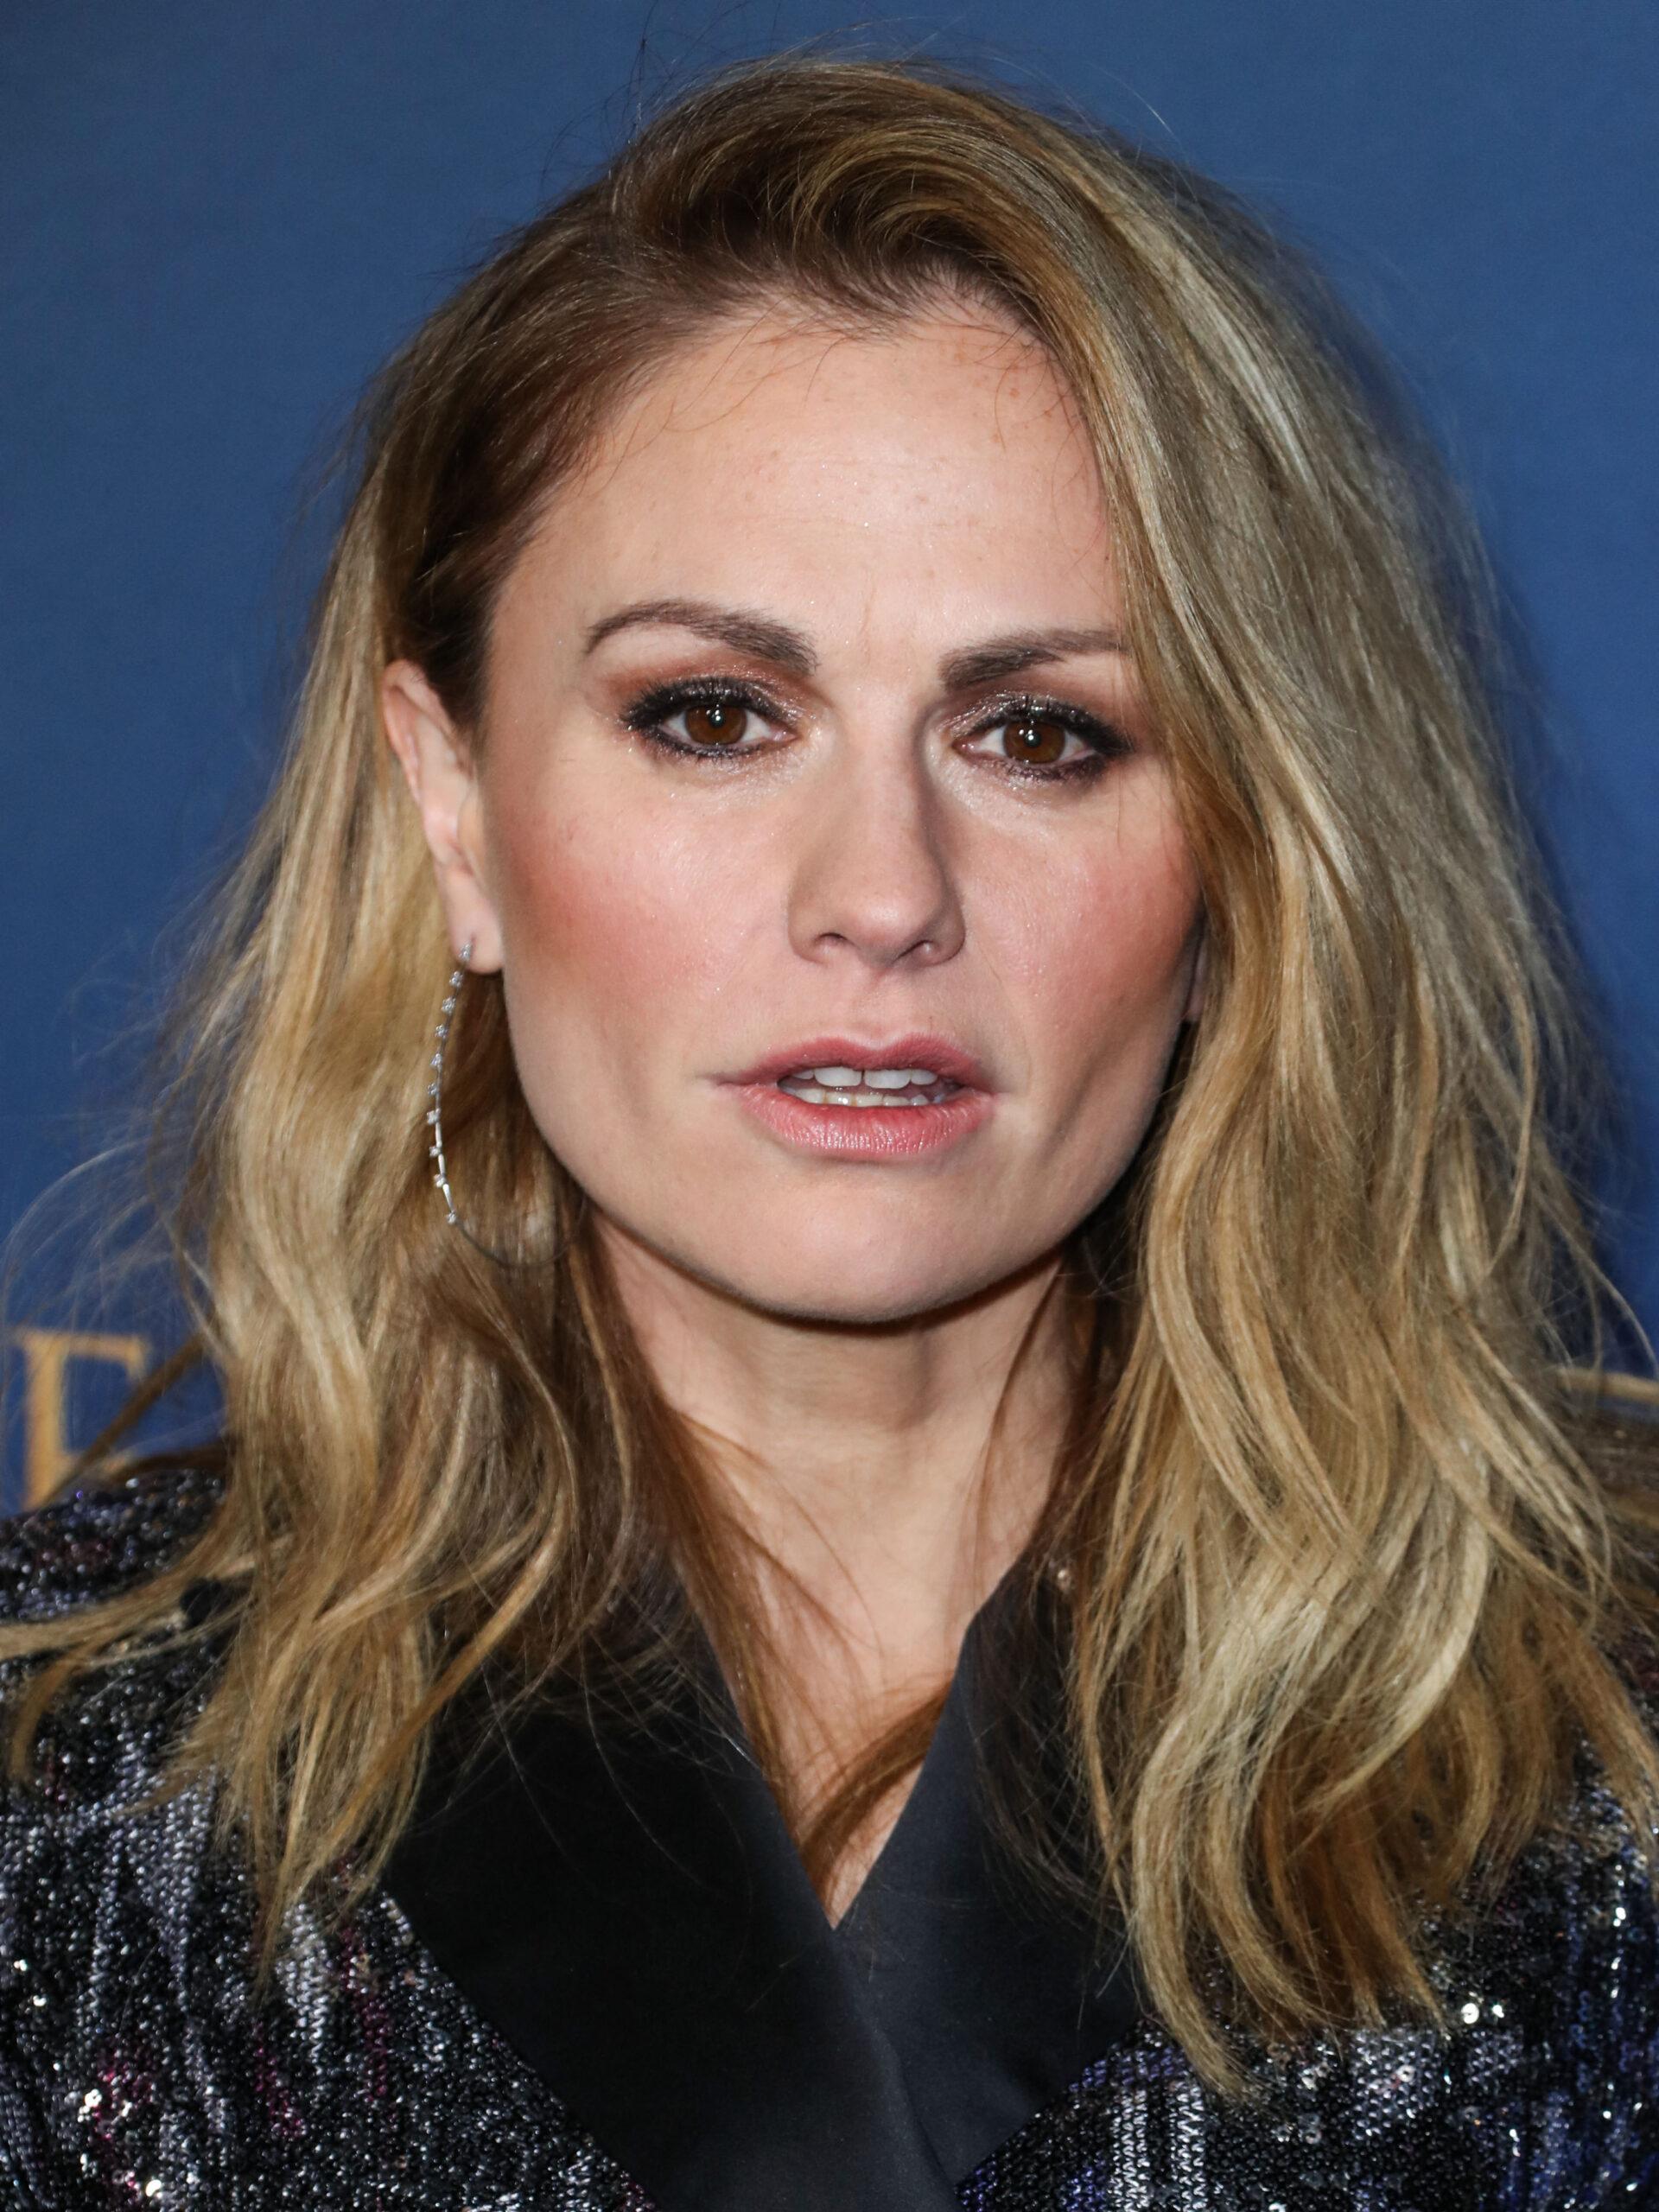 Anna Paquin Admits It ‘Hasn’t Been Easy’ As She Relies On A Cane Amid Mysterious Health Issues